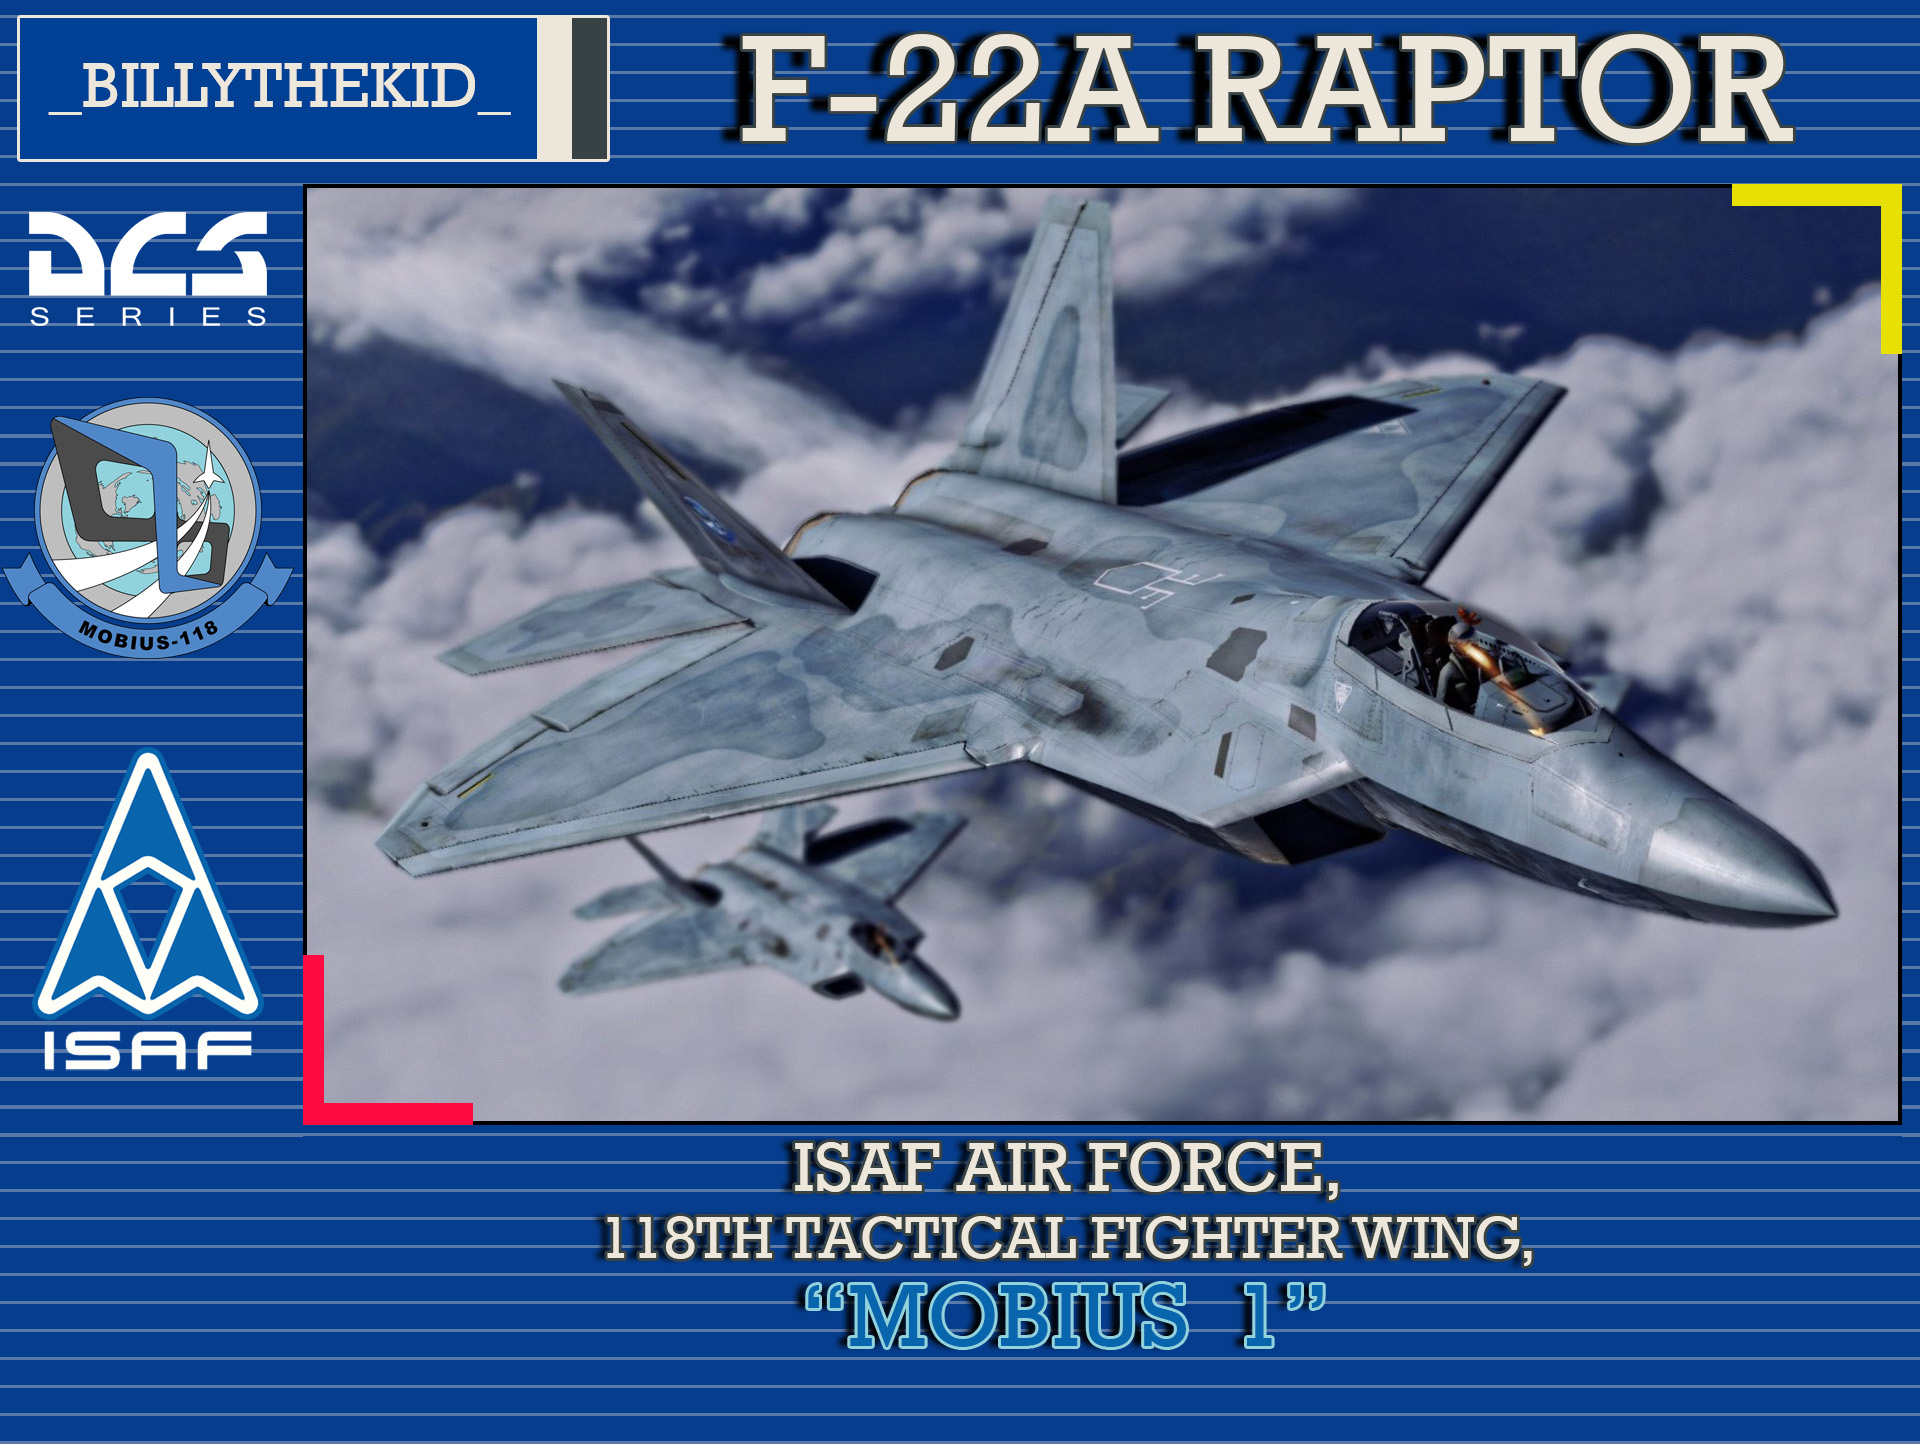 Ace Combat - ISAF Air Force - 118th Tactical Fighter Wing "Mobius 1" F-22A Raptor